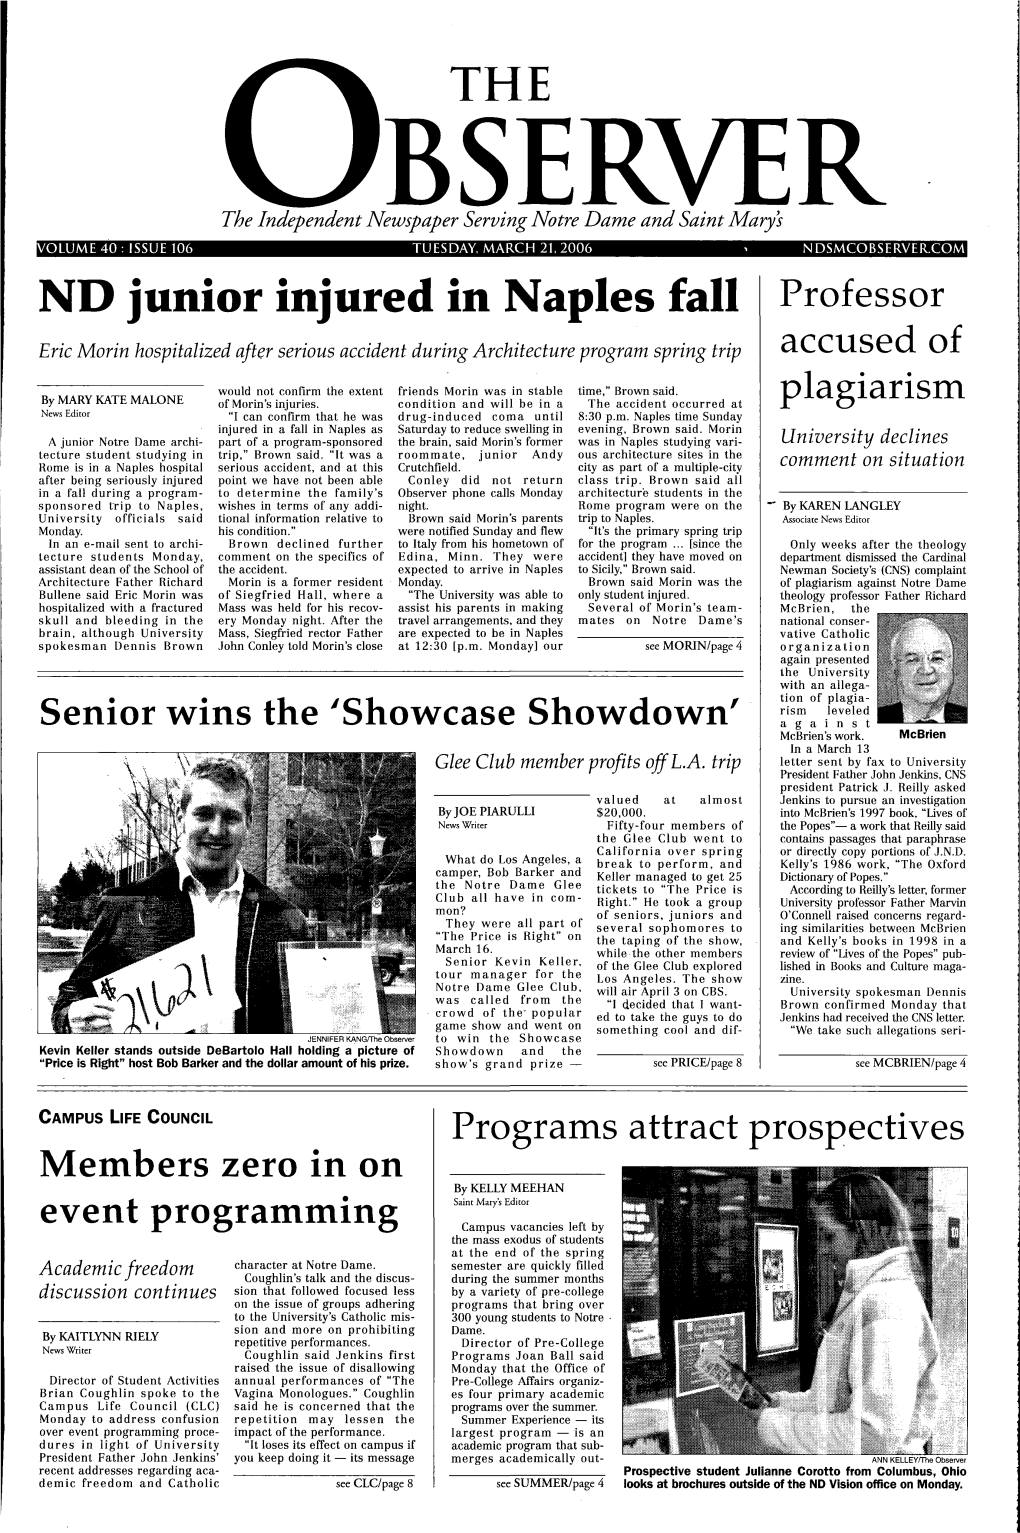 ND Junior Injured in Naples Fall Professor Eric Morin Hospitalized After Serious Accident During Architecture Program Spring Trip Accused Of